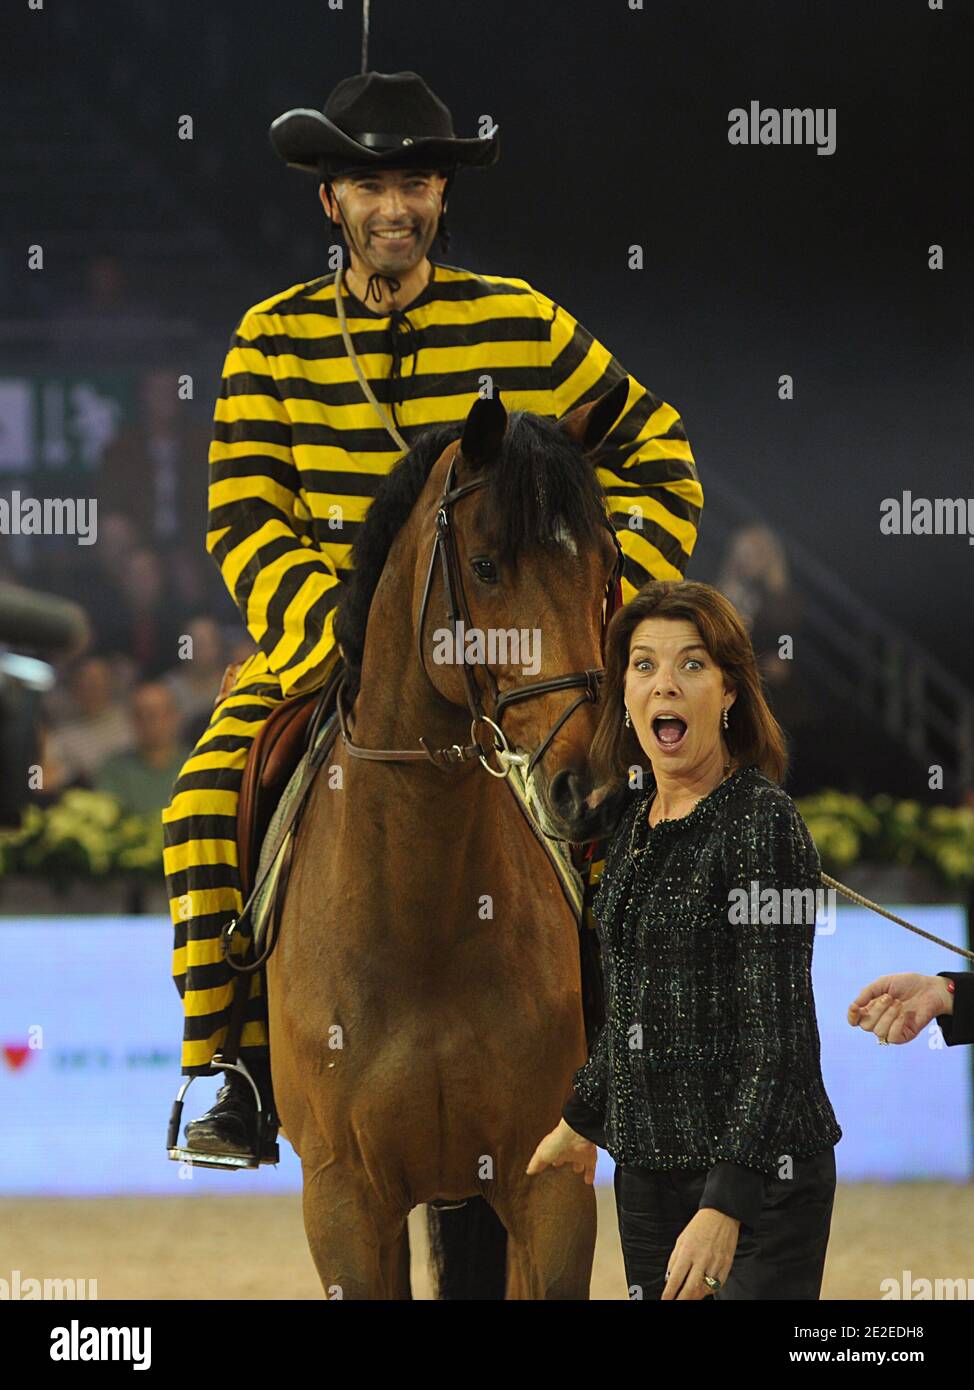 icolas Canteloup and Caroline of Hanover participate to at the Amade price during the Gucci Masters International Jumping Competition in Villepinte, North of Paris, France on December 3, 2011. Photo by Giancarlo Gorassini/ABACAPRESS.COM Stock Photo